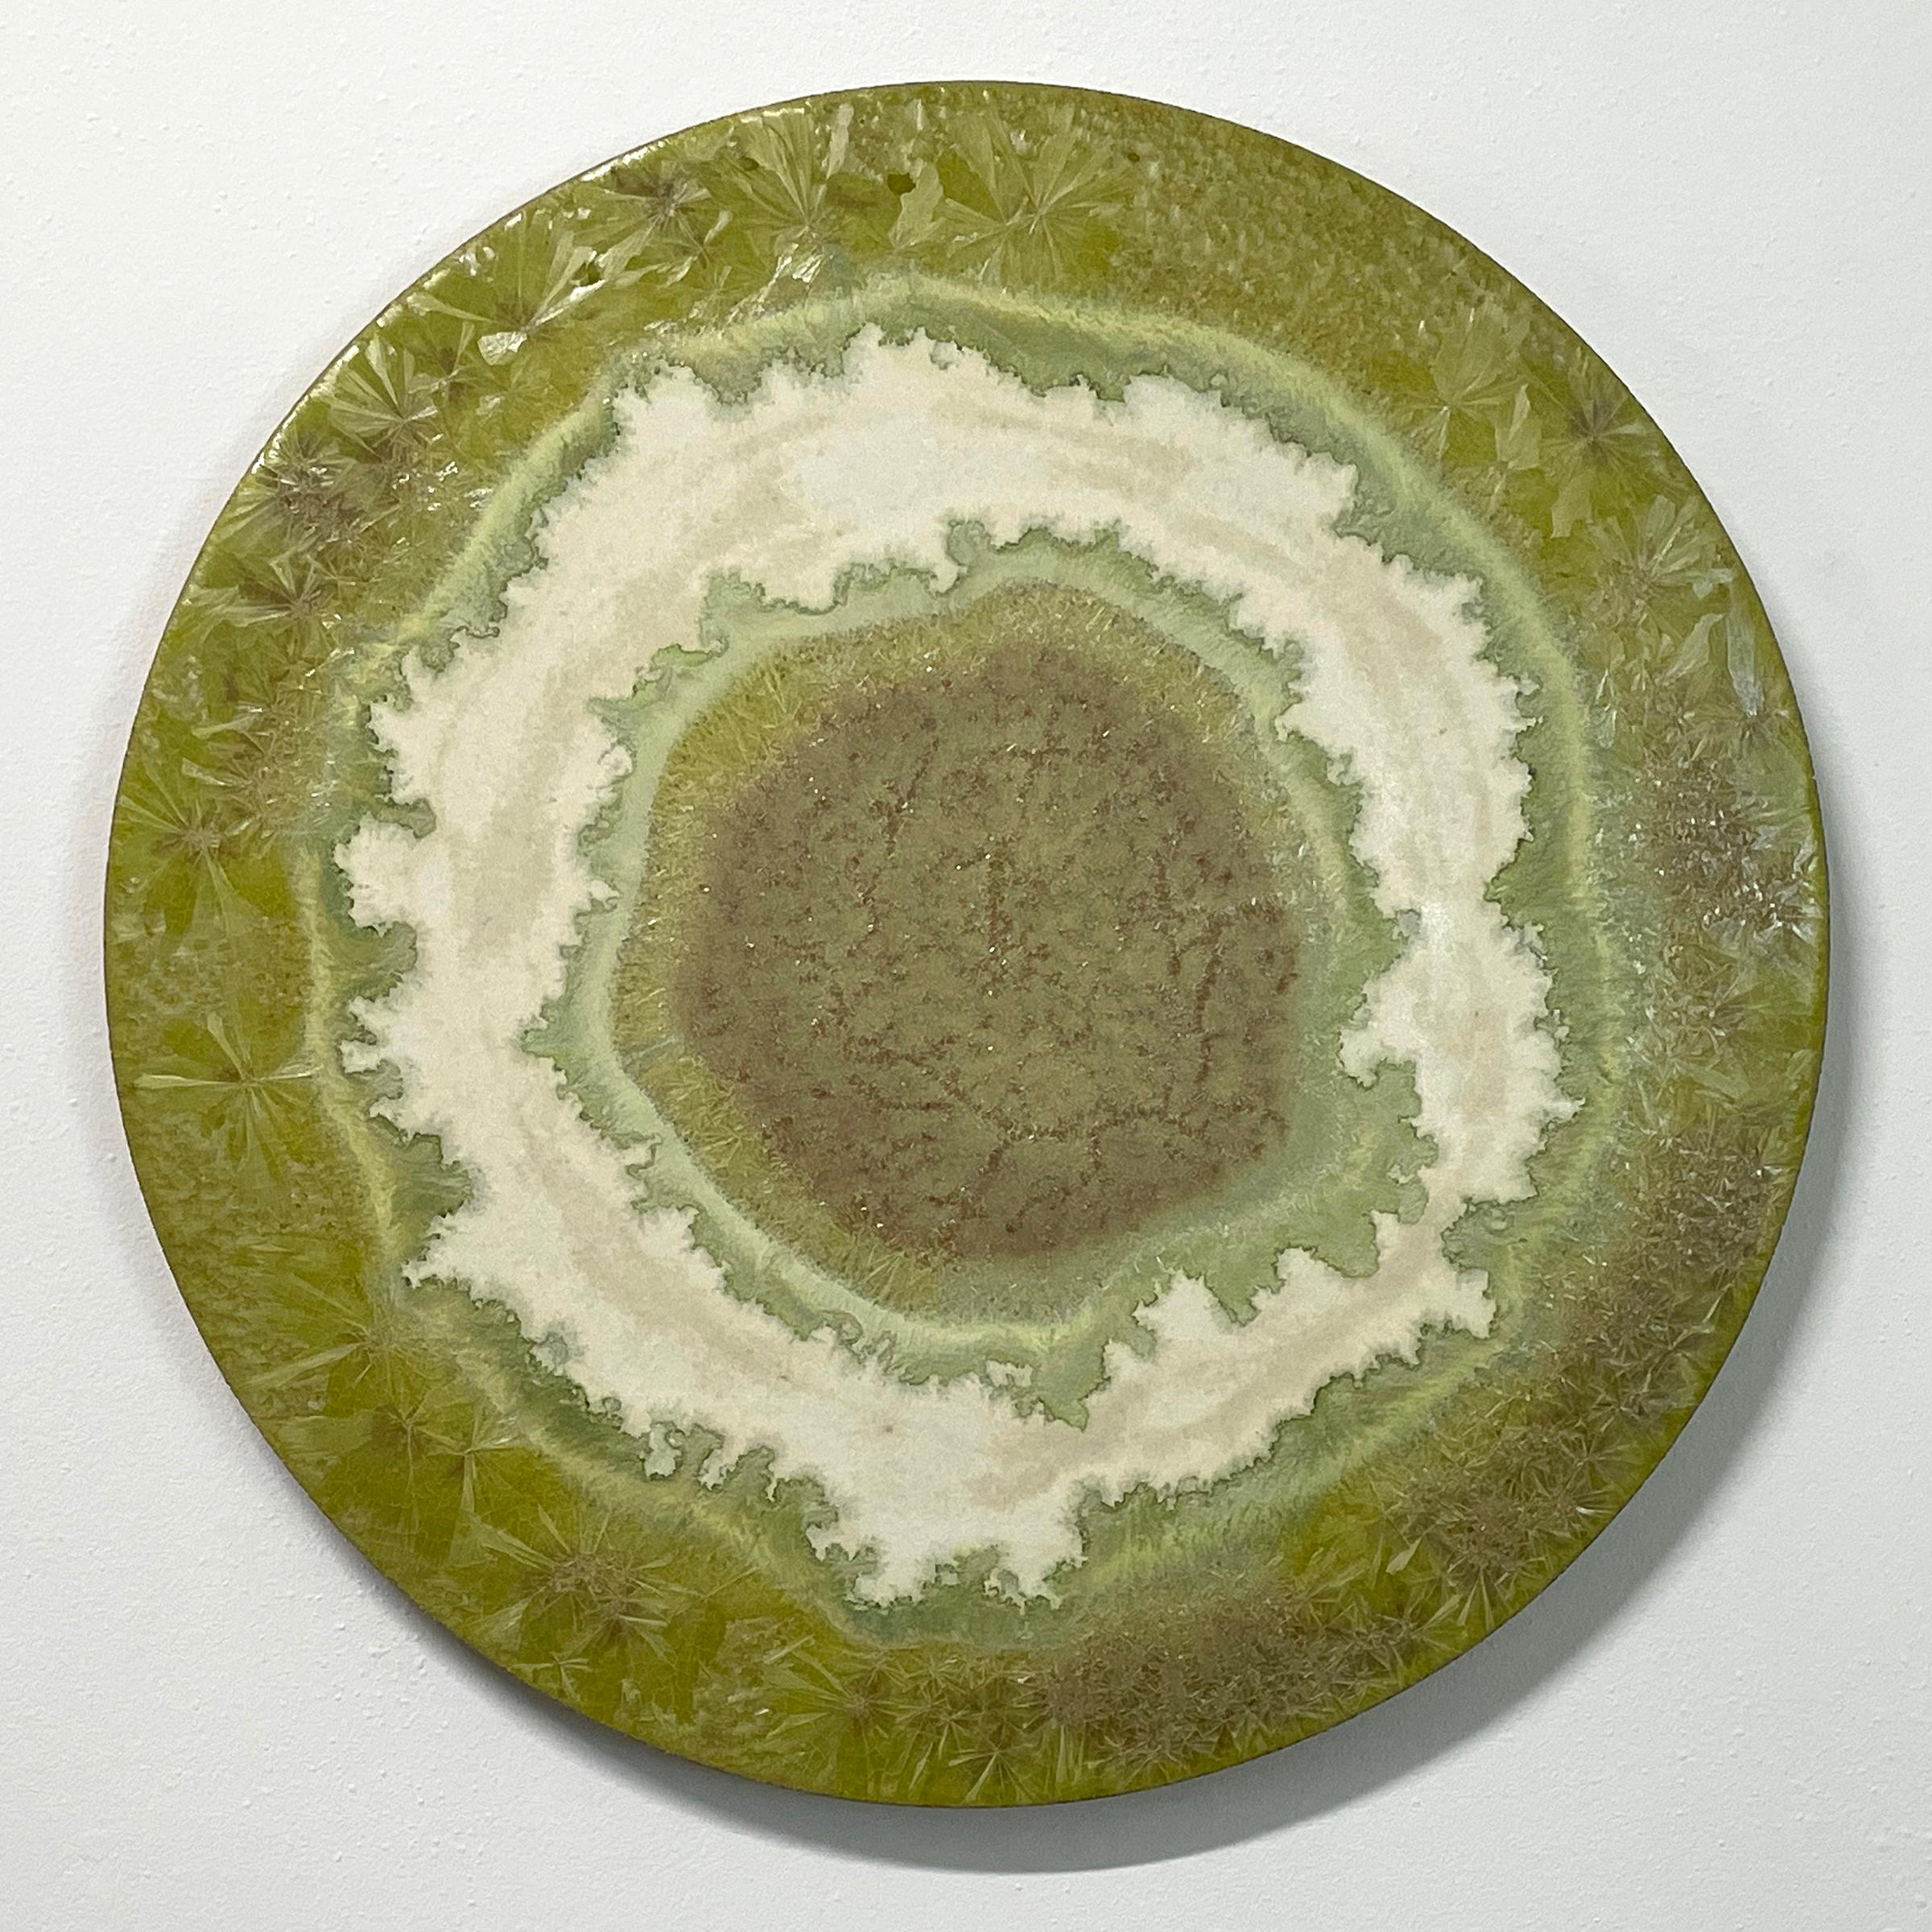 Lift Off
Ceramic painting by William Edwards
Hand rolled earthenware circular slab with crystalline glaze. 

William received his BFA in sculpture from the historic San Francisco Art Institute and his MFA from UC Davis. William produces hand made,